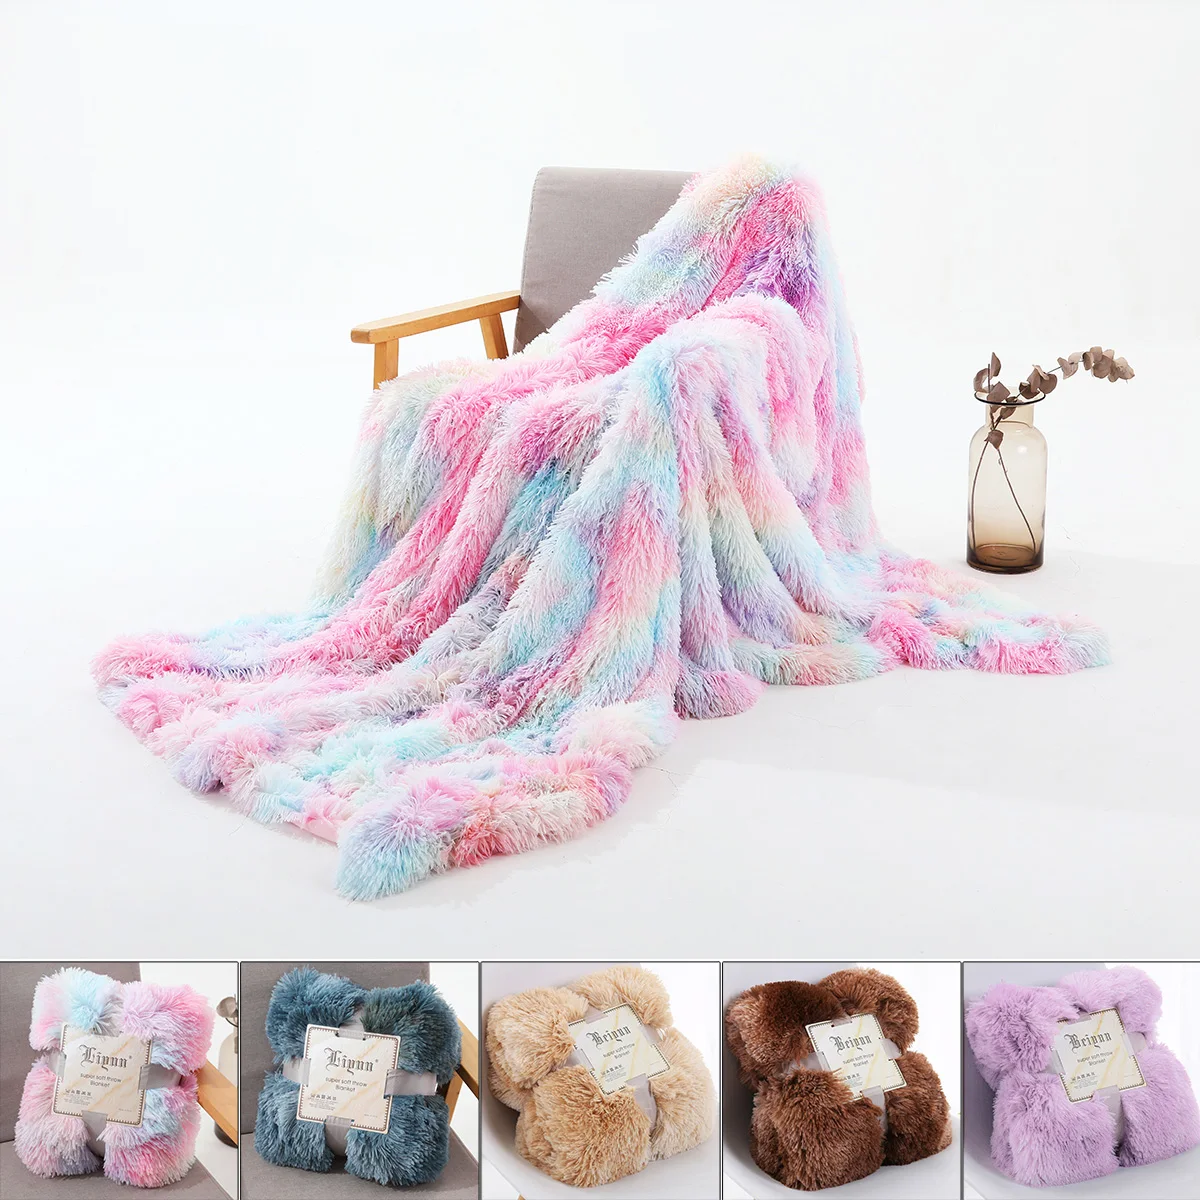 Details about   Tie Dye Shaggy Baby Blanket Ombre Fluffy Warm Unicorn Velvet Rug Bedding Cover 